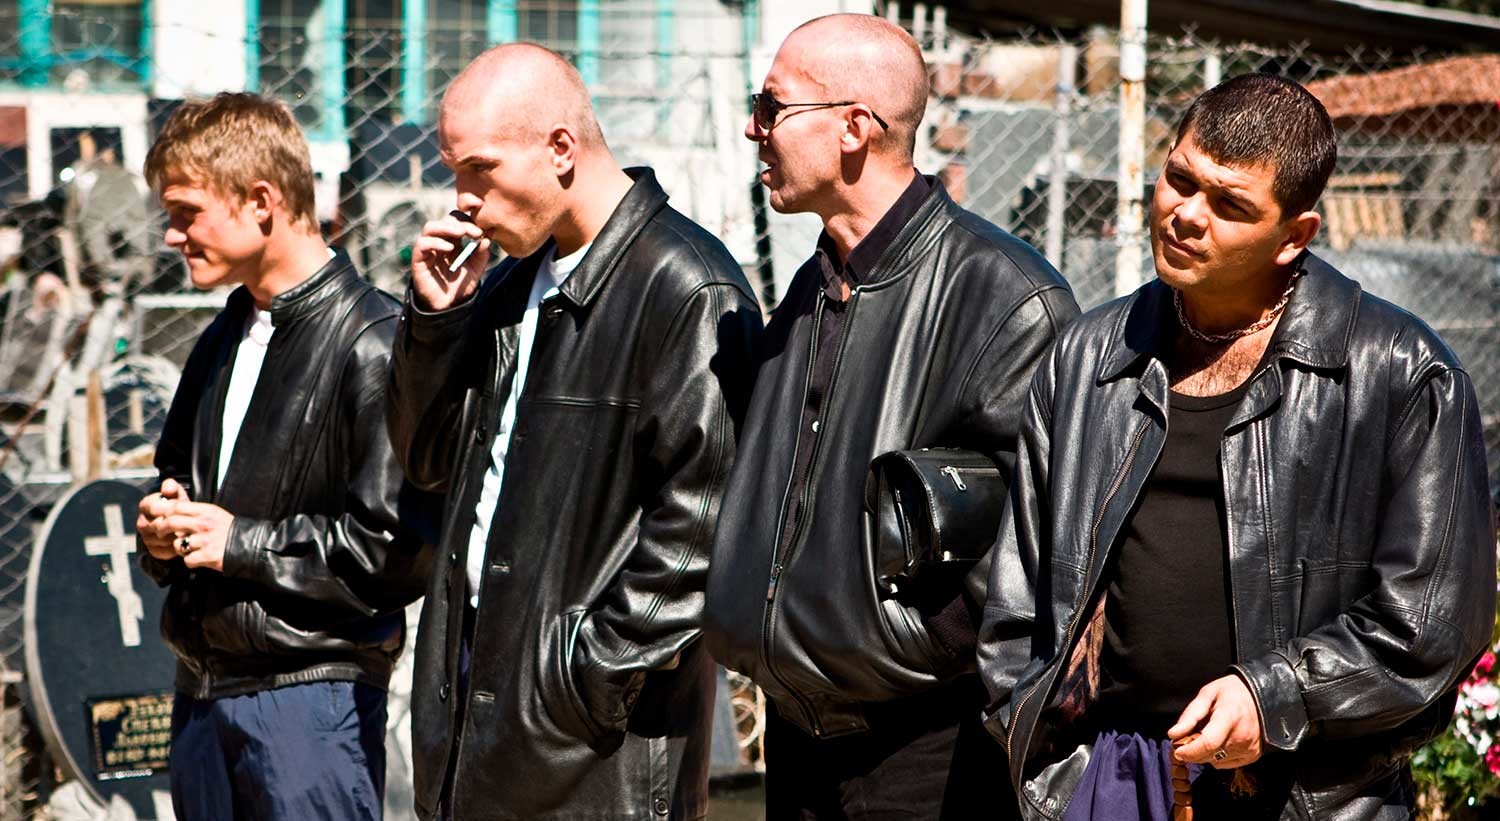 The leather jackets became the symbol of the 1990s